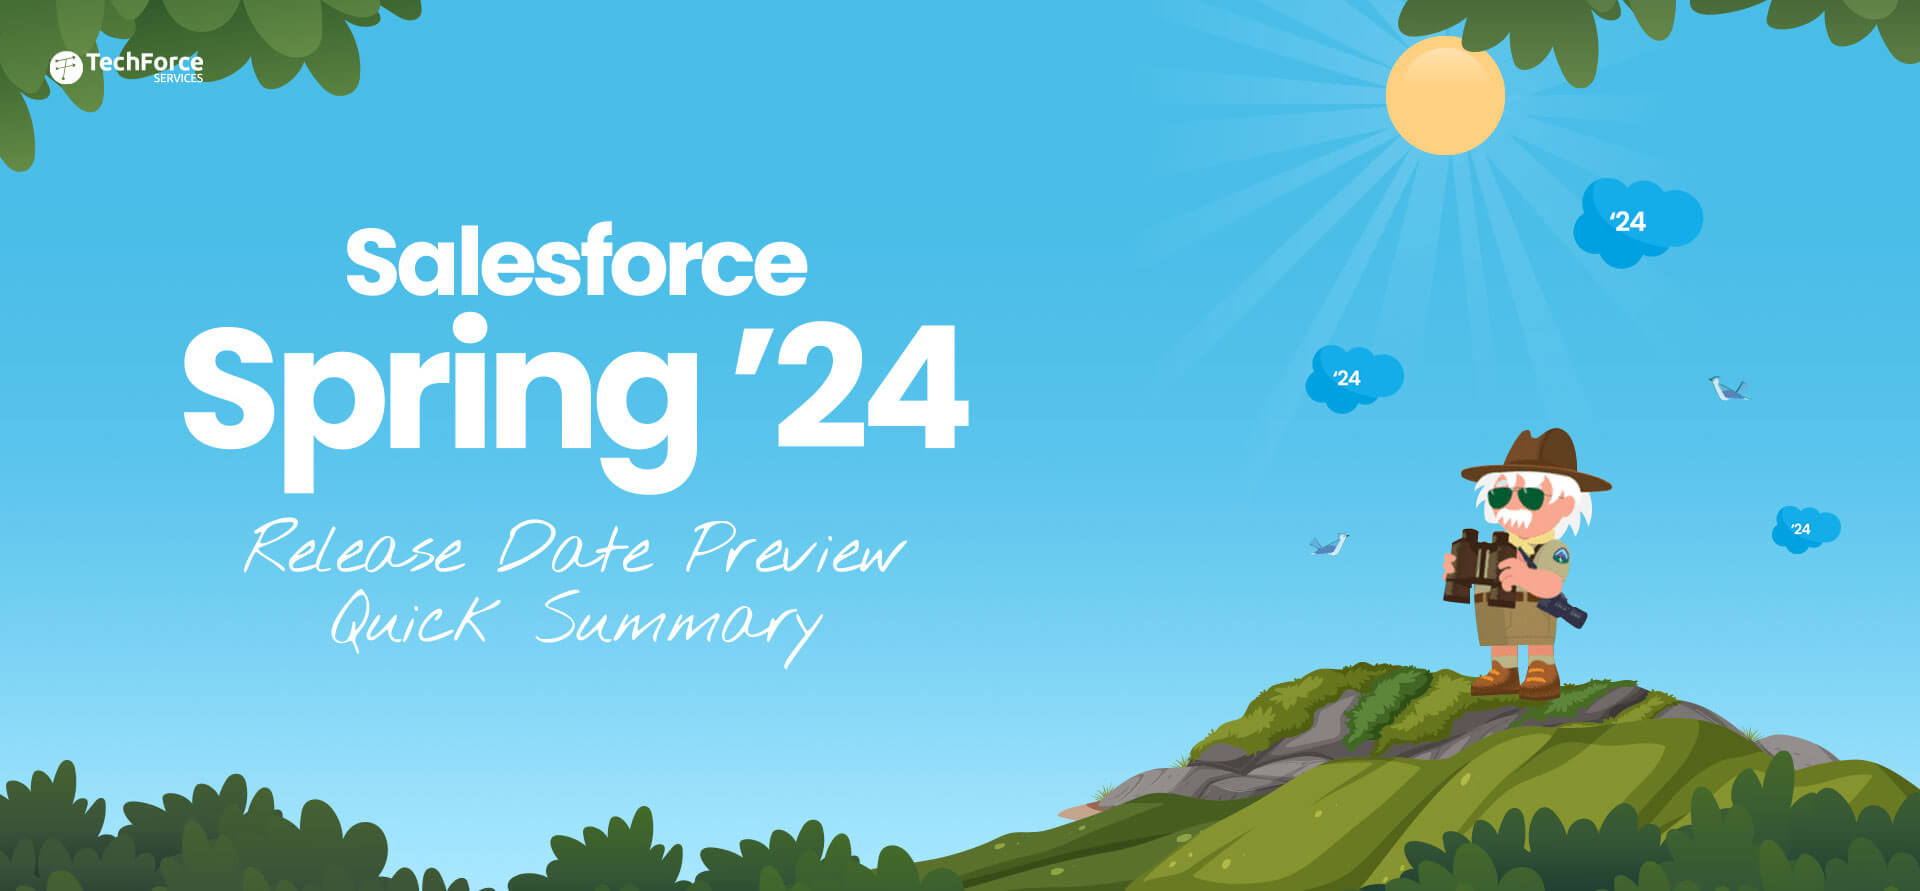 Salesforce-Spring-24-Release-Date-Preview-Quick-Summary